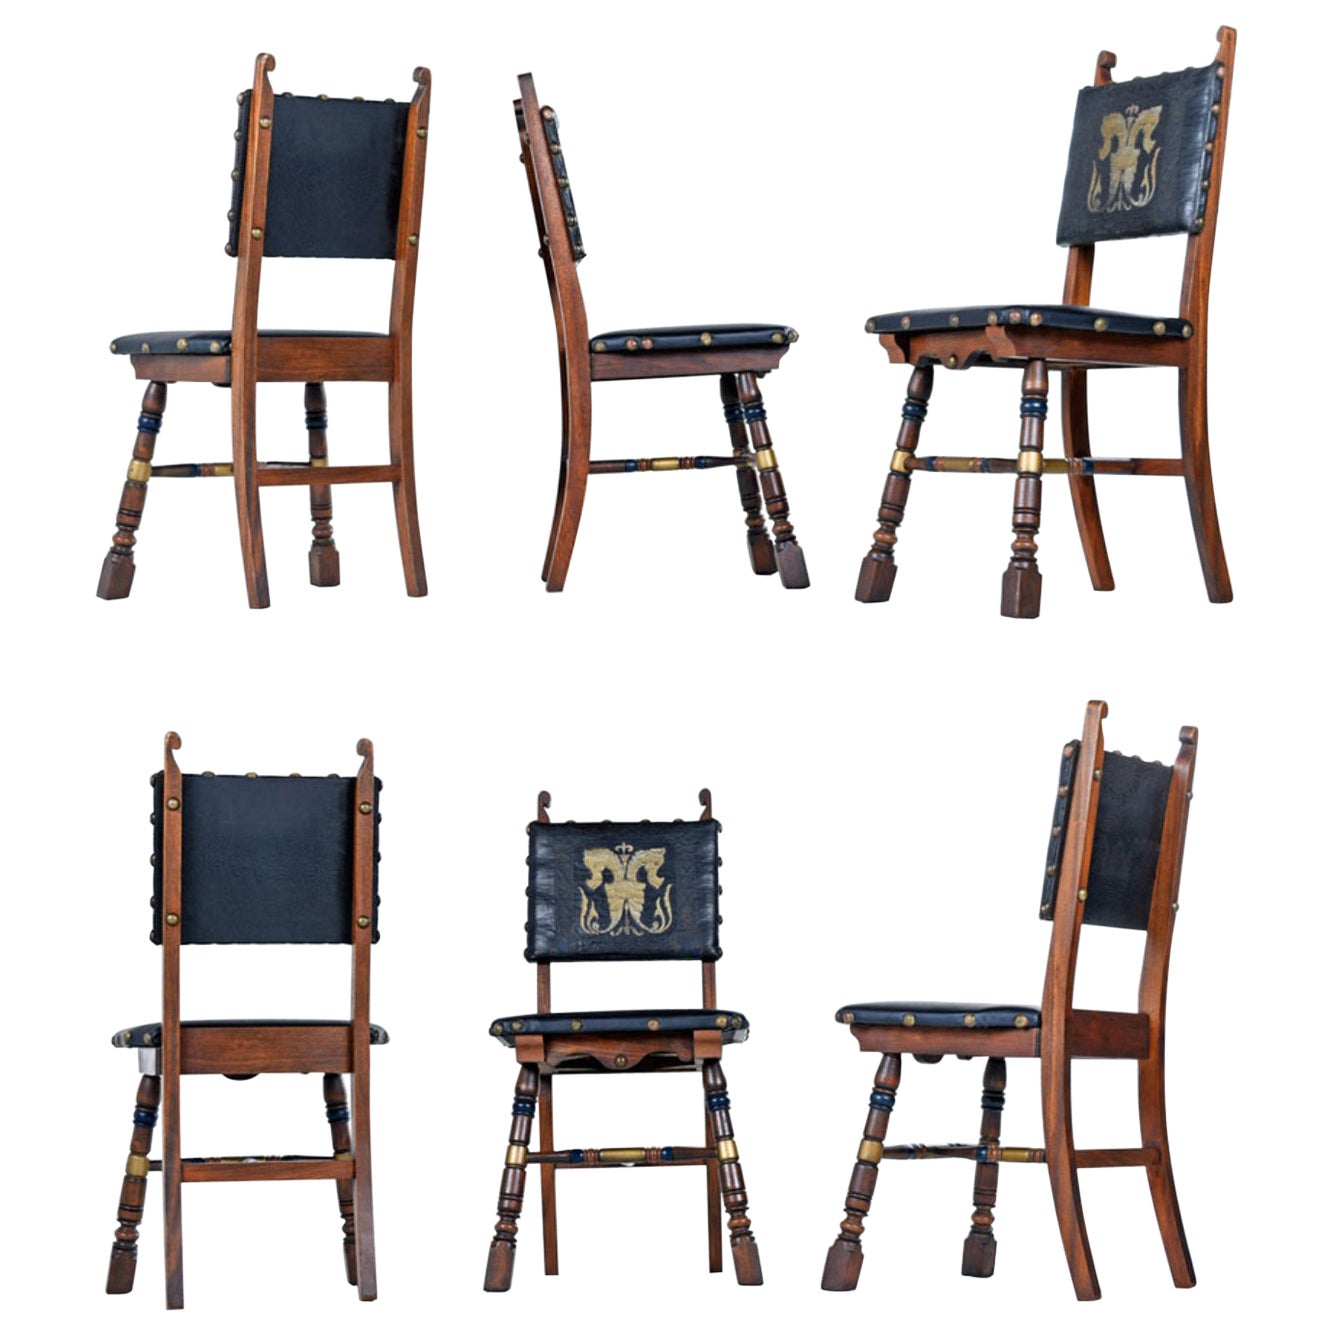 Gothic Revival Style Dragon Motif Brass and Leather Mahogany Oak Chairs